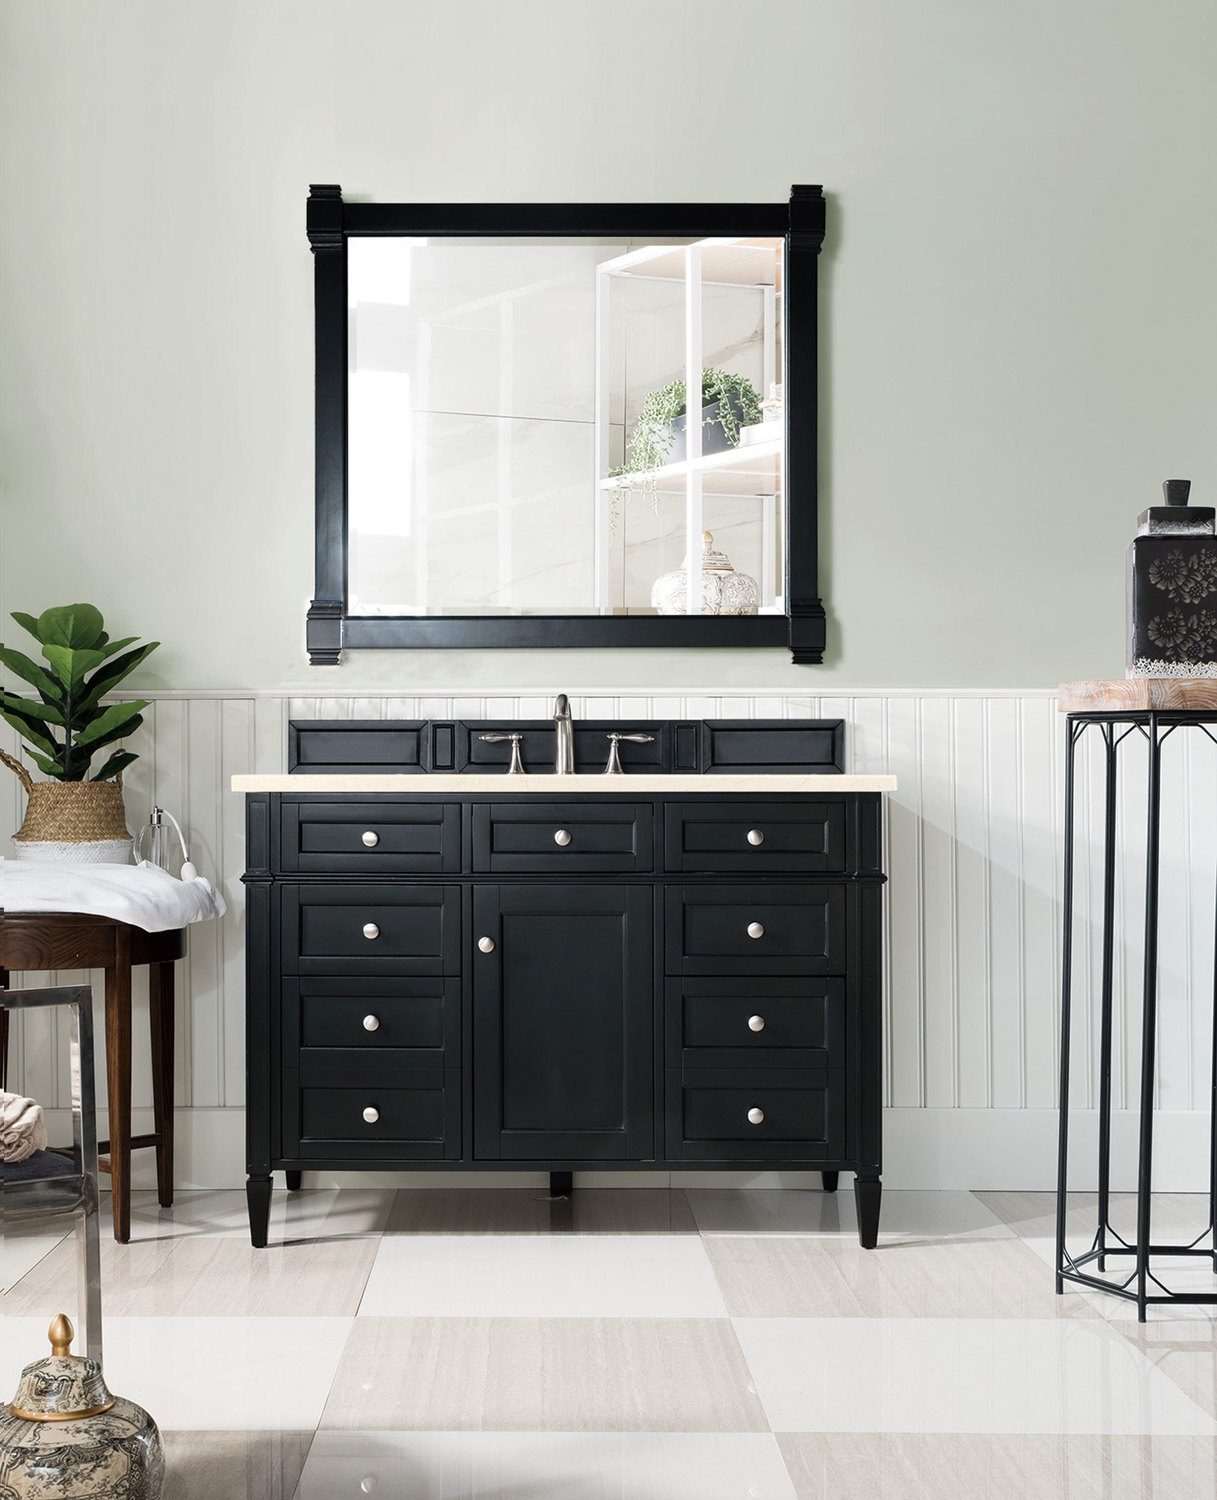 bathroom sinks without cabinets James Martin Vanity Black Onyx Transitional